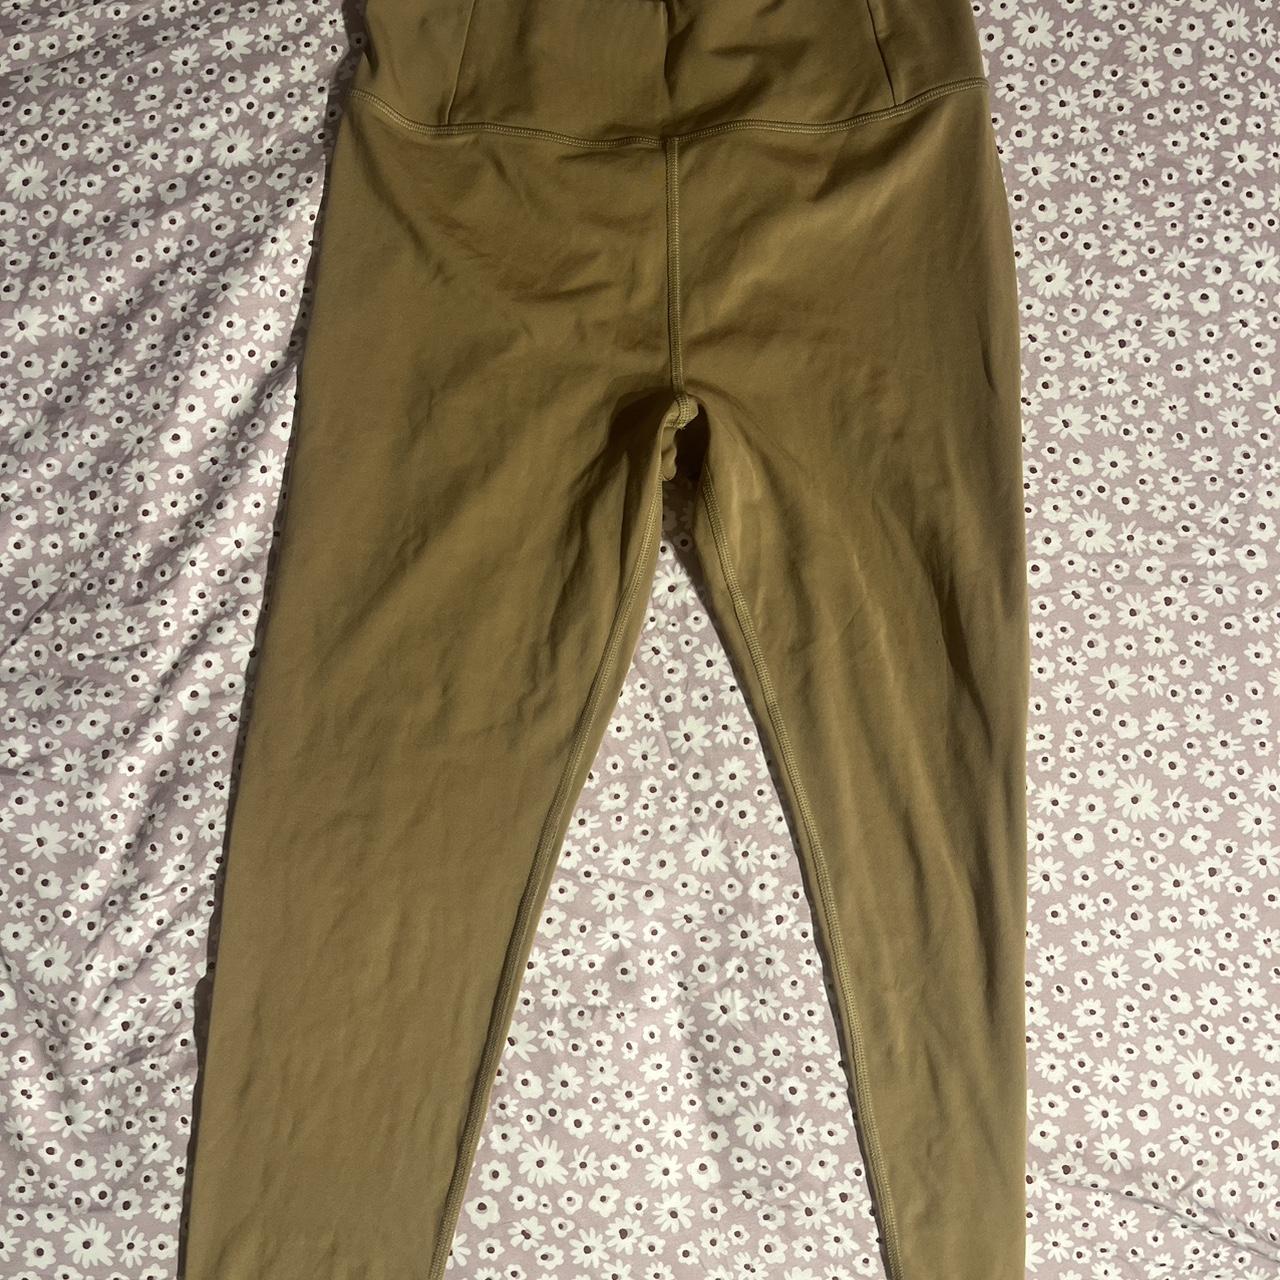 NWT Girlfriend Collective leggings in limited - Depop